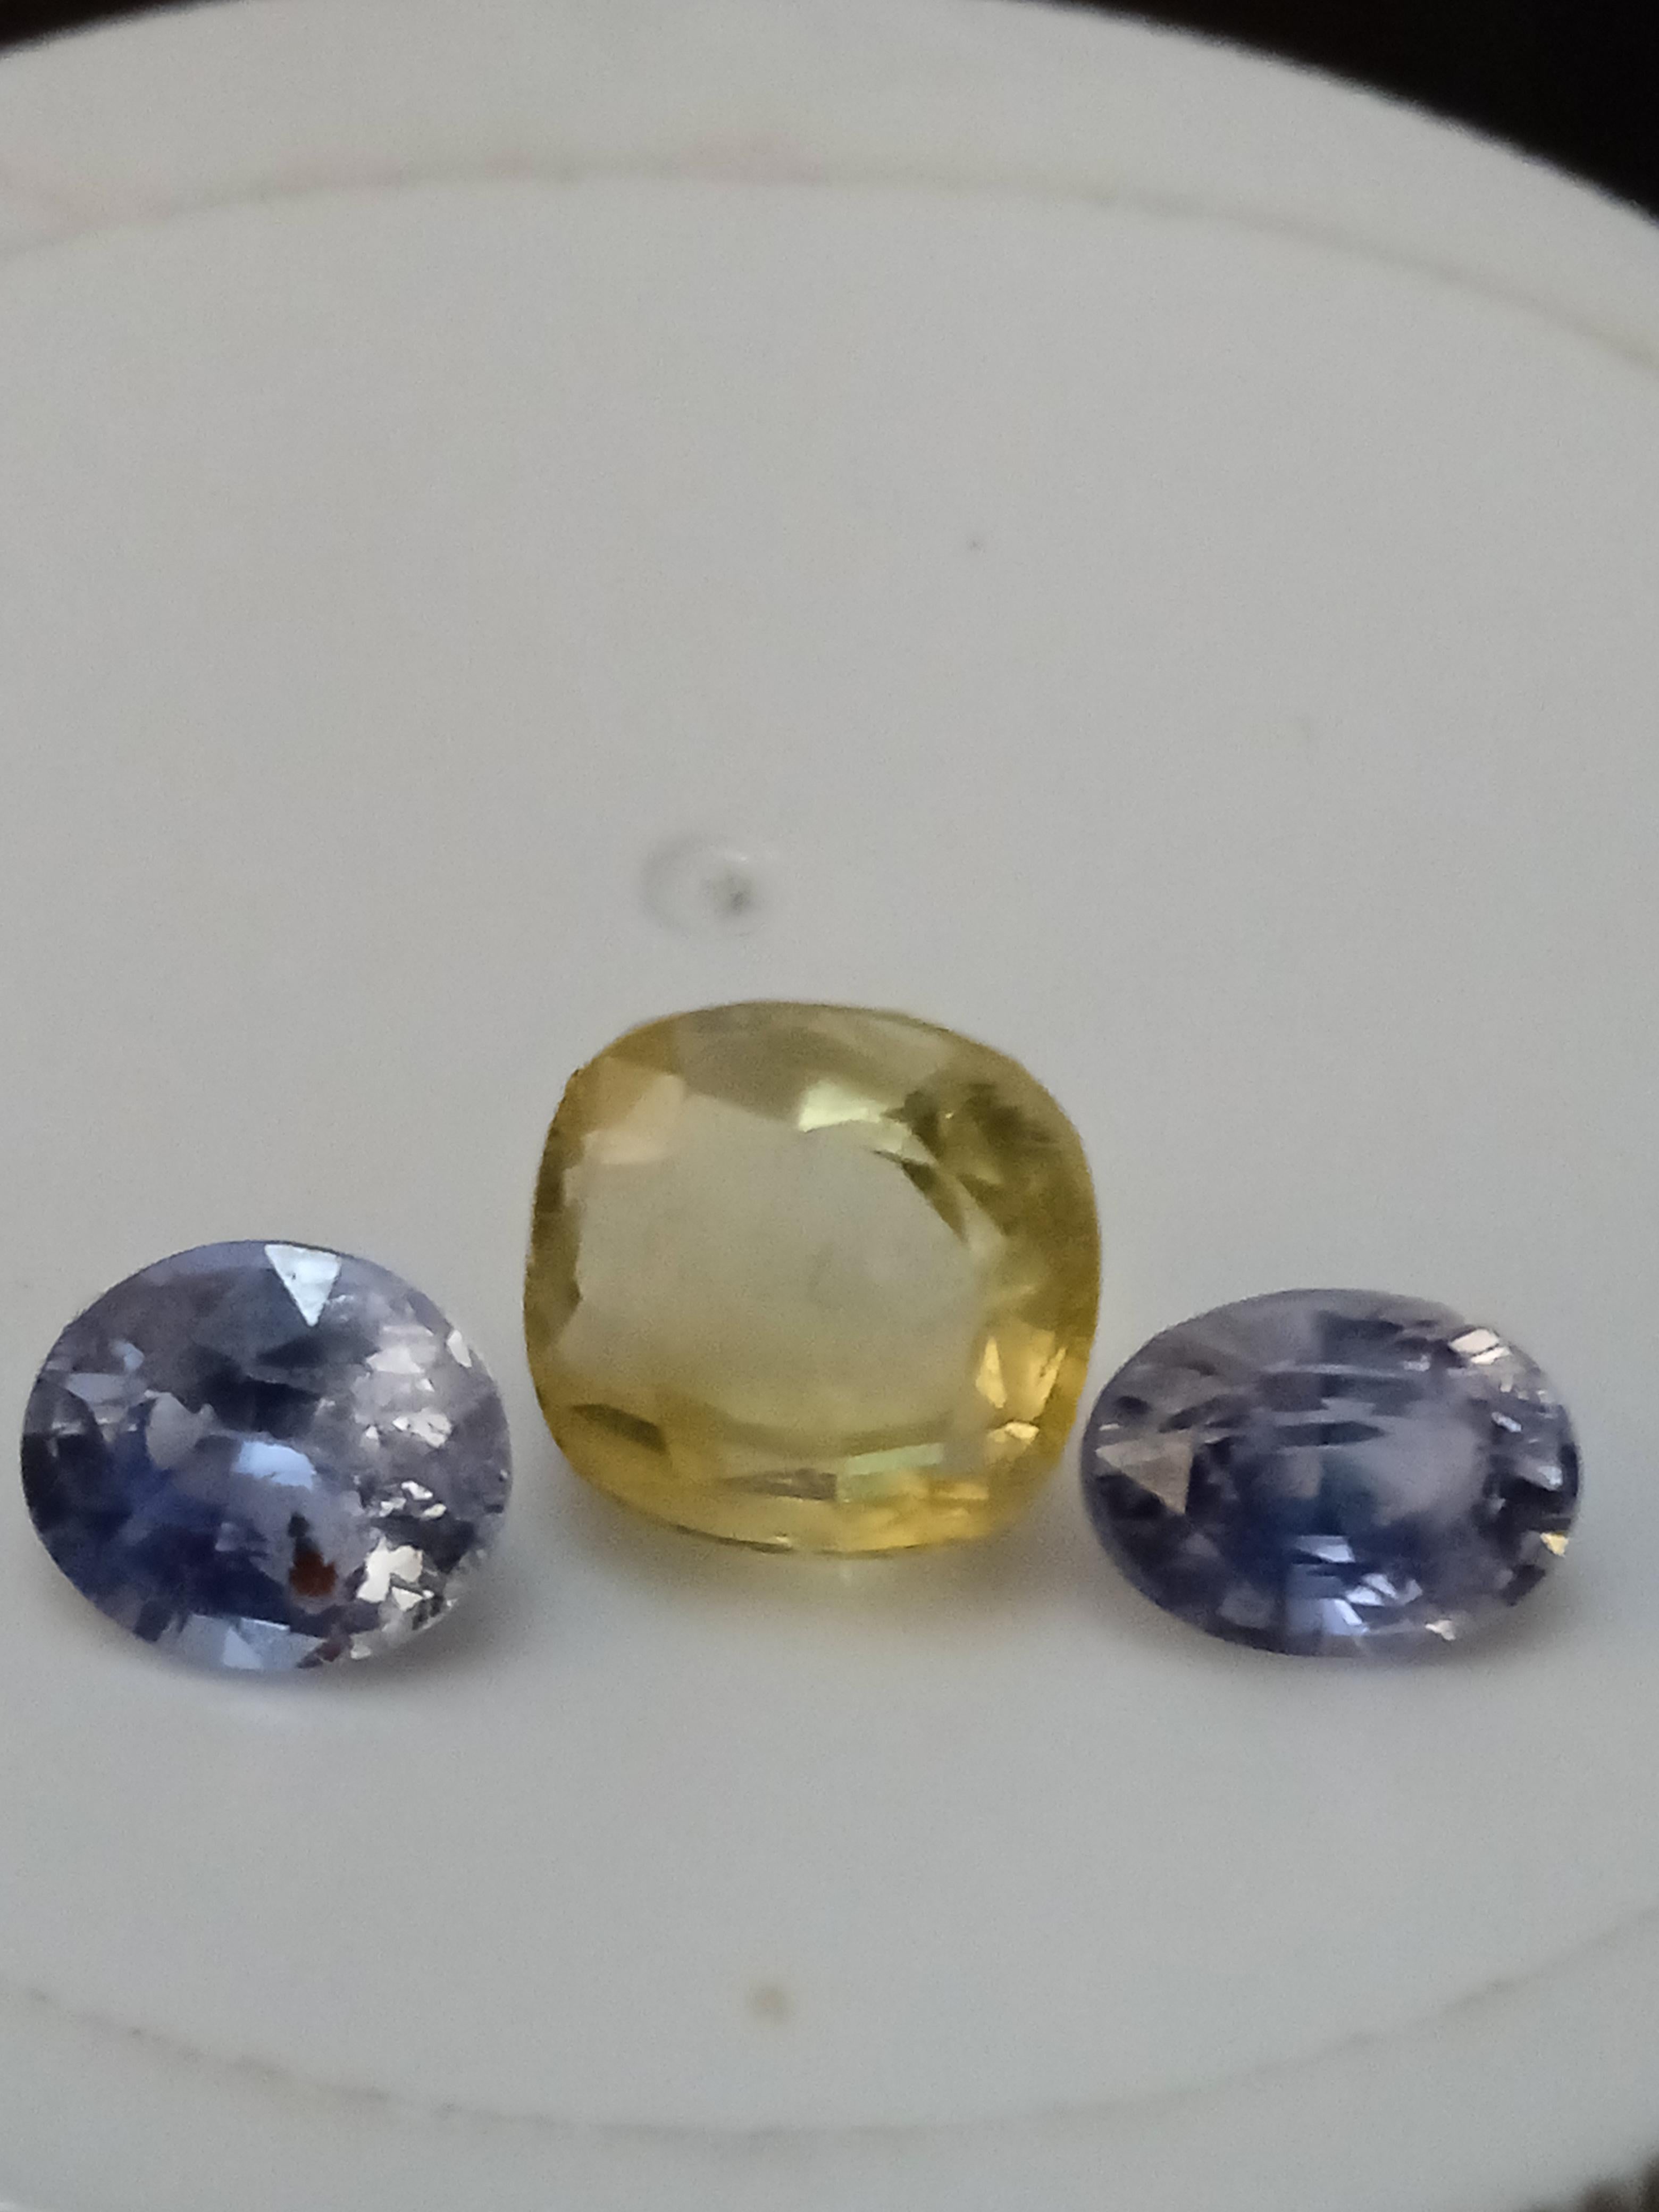 Add a touch of elegance to your jewelry collection with this stunning 3-piece set of natural blue Sapphires and yellow Spinel gemstones. The set includes three pieces, each featuring a cushion-shaped gemstone measuring 3mm in length, 5mm in width,